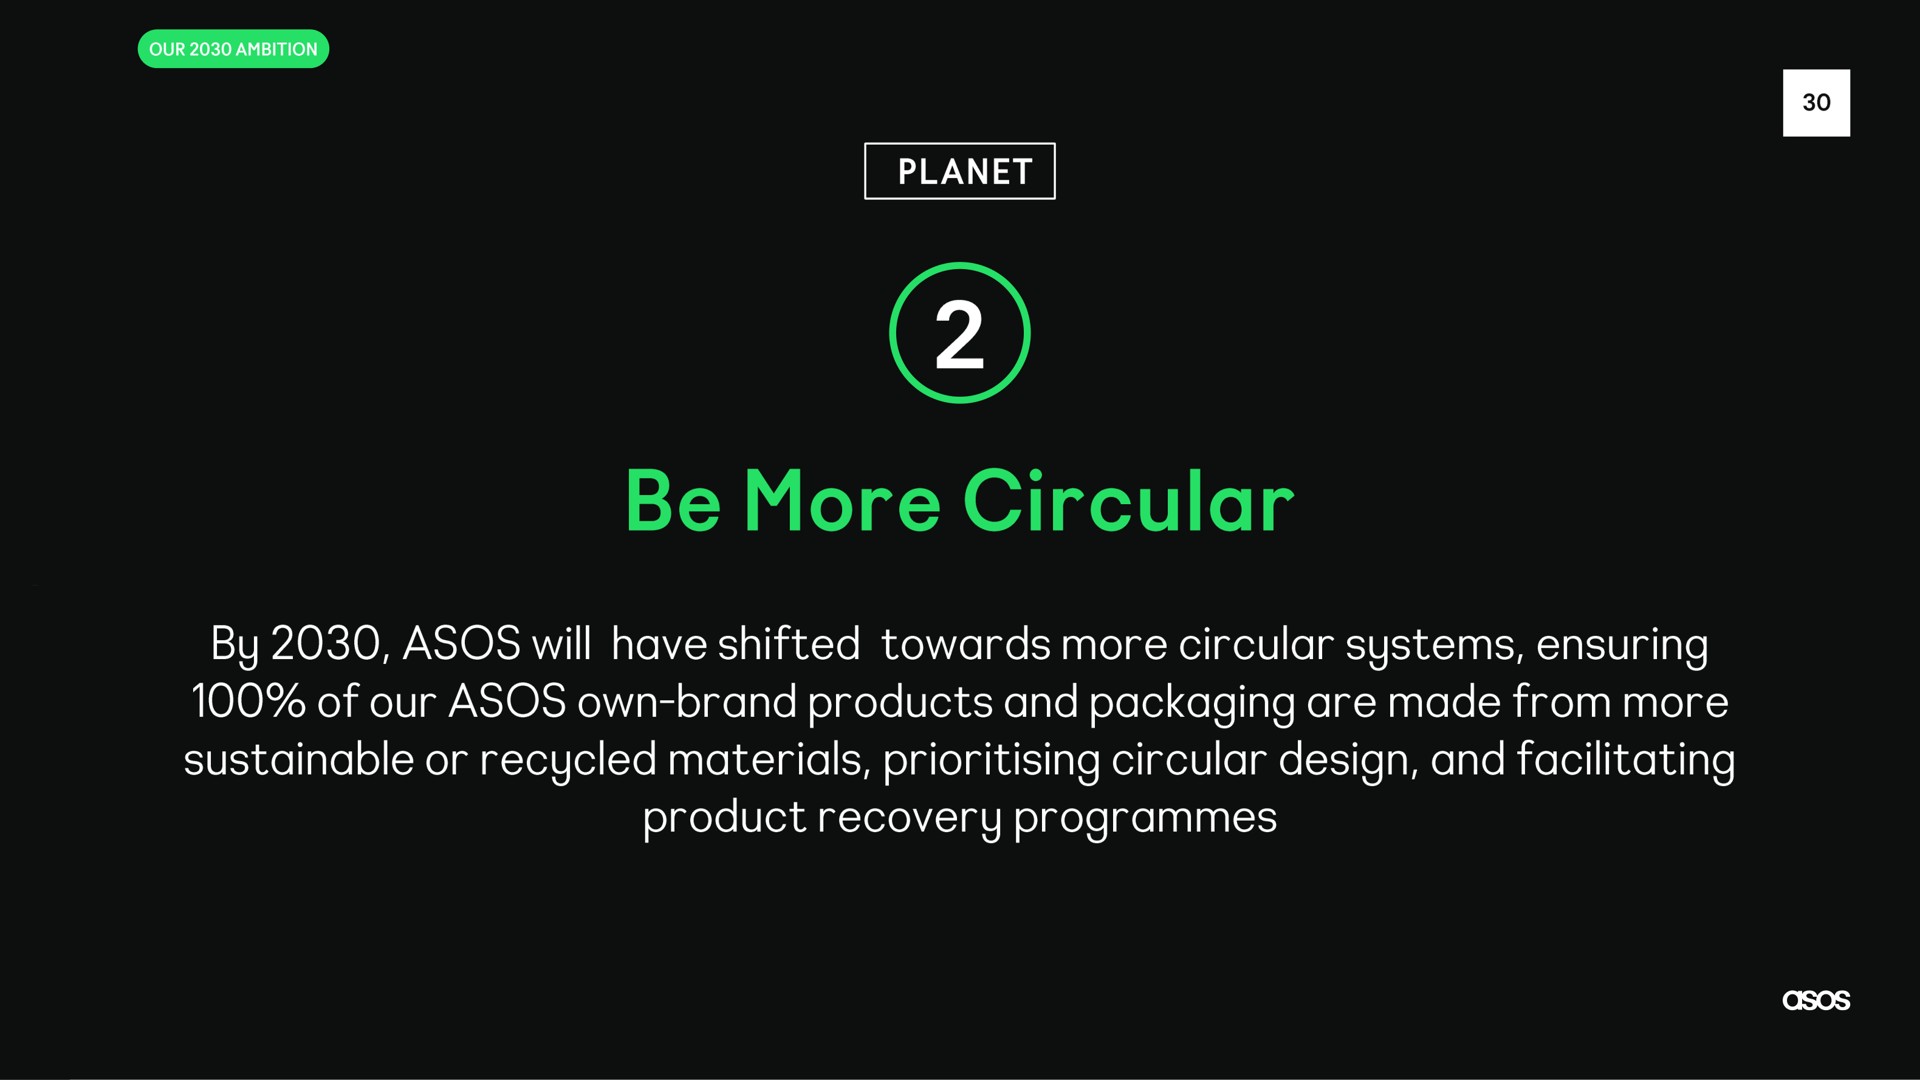 be more circular by will have shifted towards more circular systems ensuring of our own brand products and packaging are made from more sustainable or recycled materials circular design and facilitating product recovery programmes | Asos